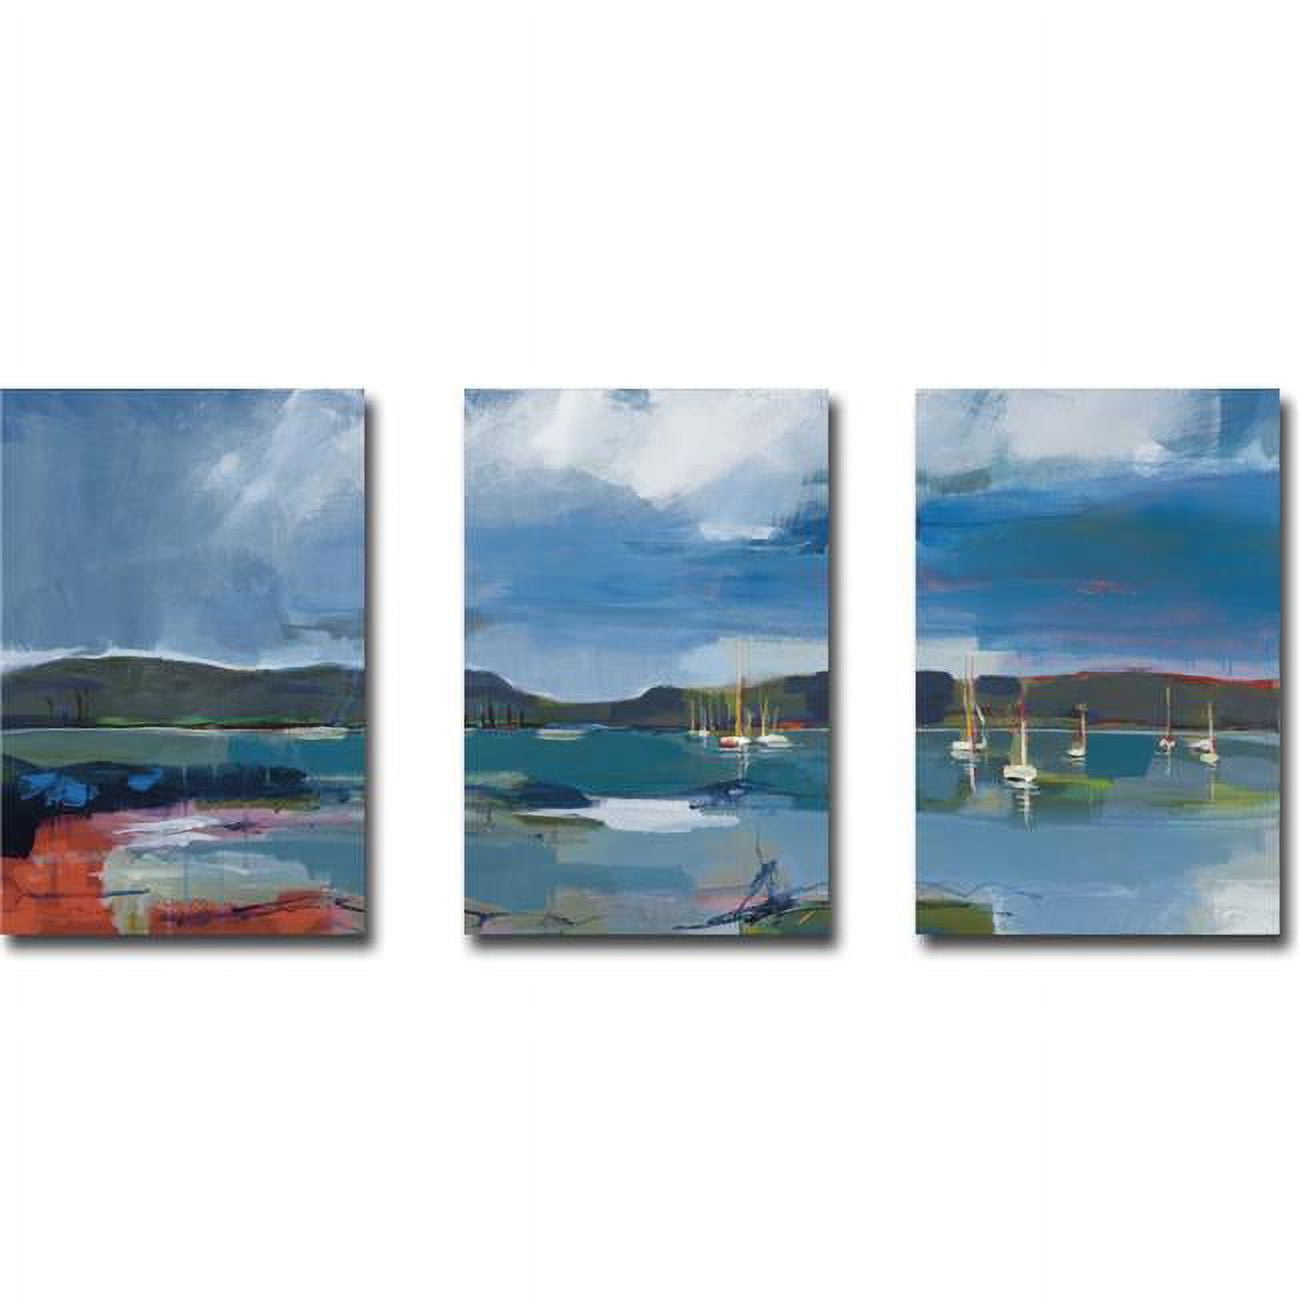 1218l602cg Coastal Display I, Ii, & Iii By A. Fitsimmons 3 Piece Premium Gallery-wrapped Canvas Giclee Art Set - 12 X 18 X 1.5 In.